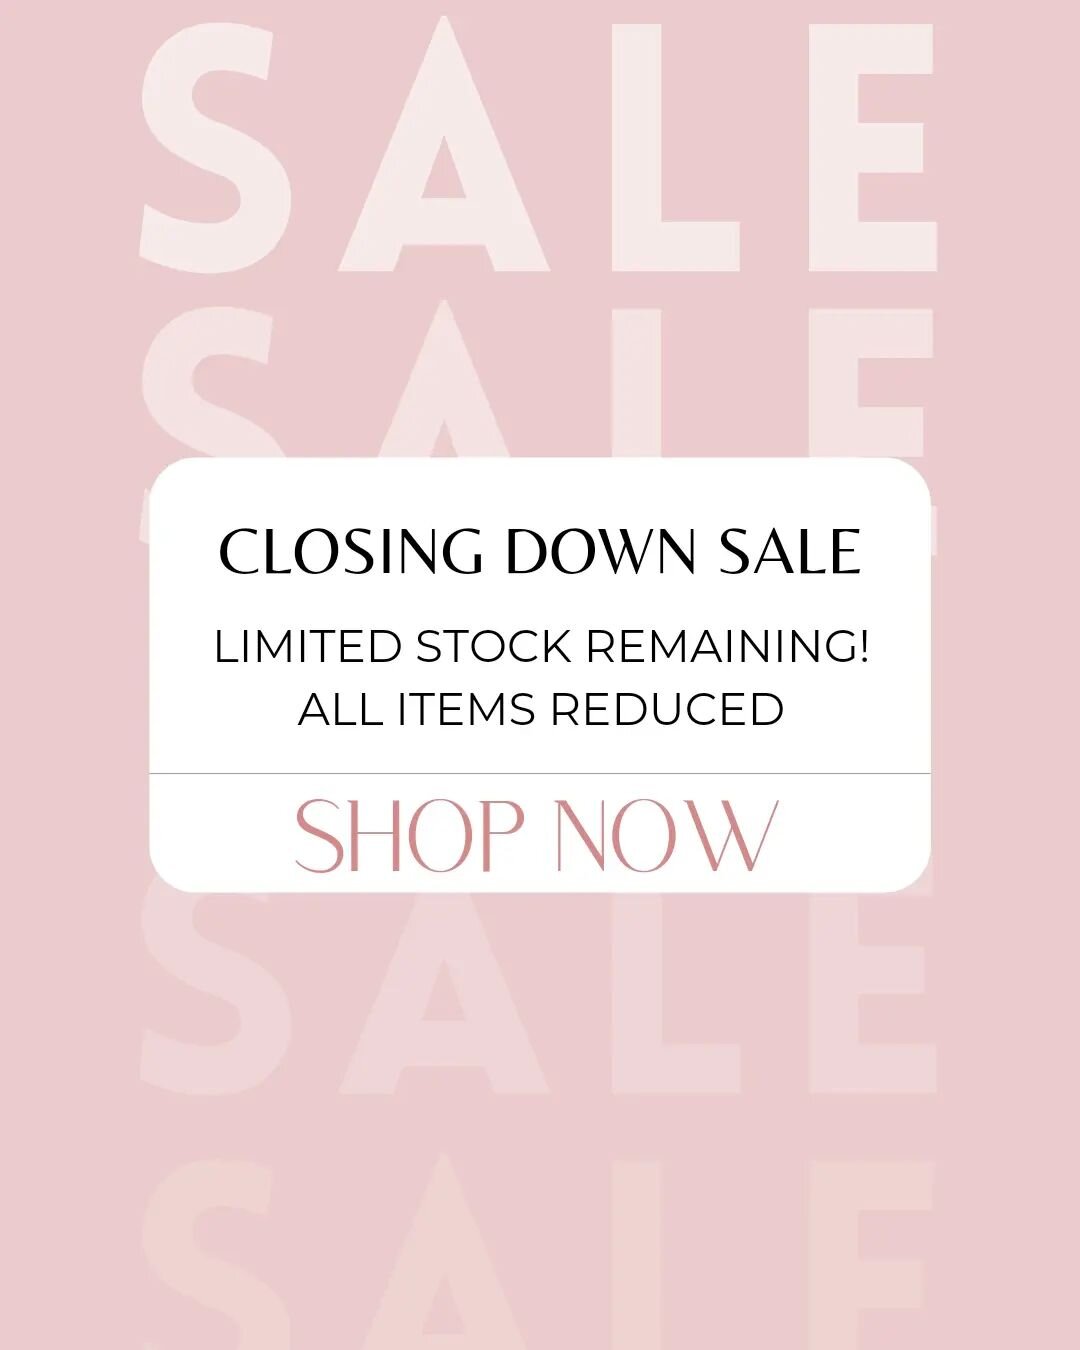 Have you shopped our closing down sale yet? 

All items heavily reduced. Limited availability in most designs and sizes ✨🙌🏼

Items from as little as &pound;1.50! 😱🙌🏼✨

www.dapperdachshunddesigns.com